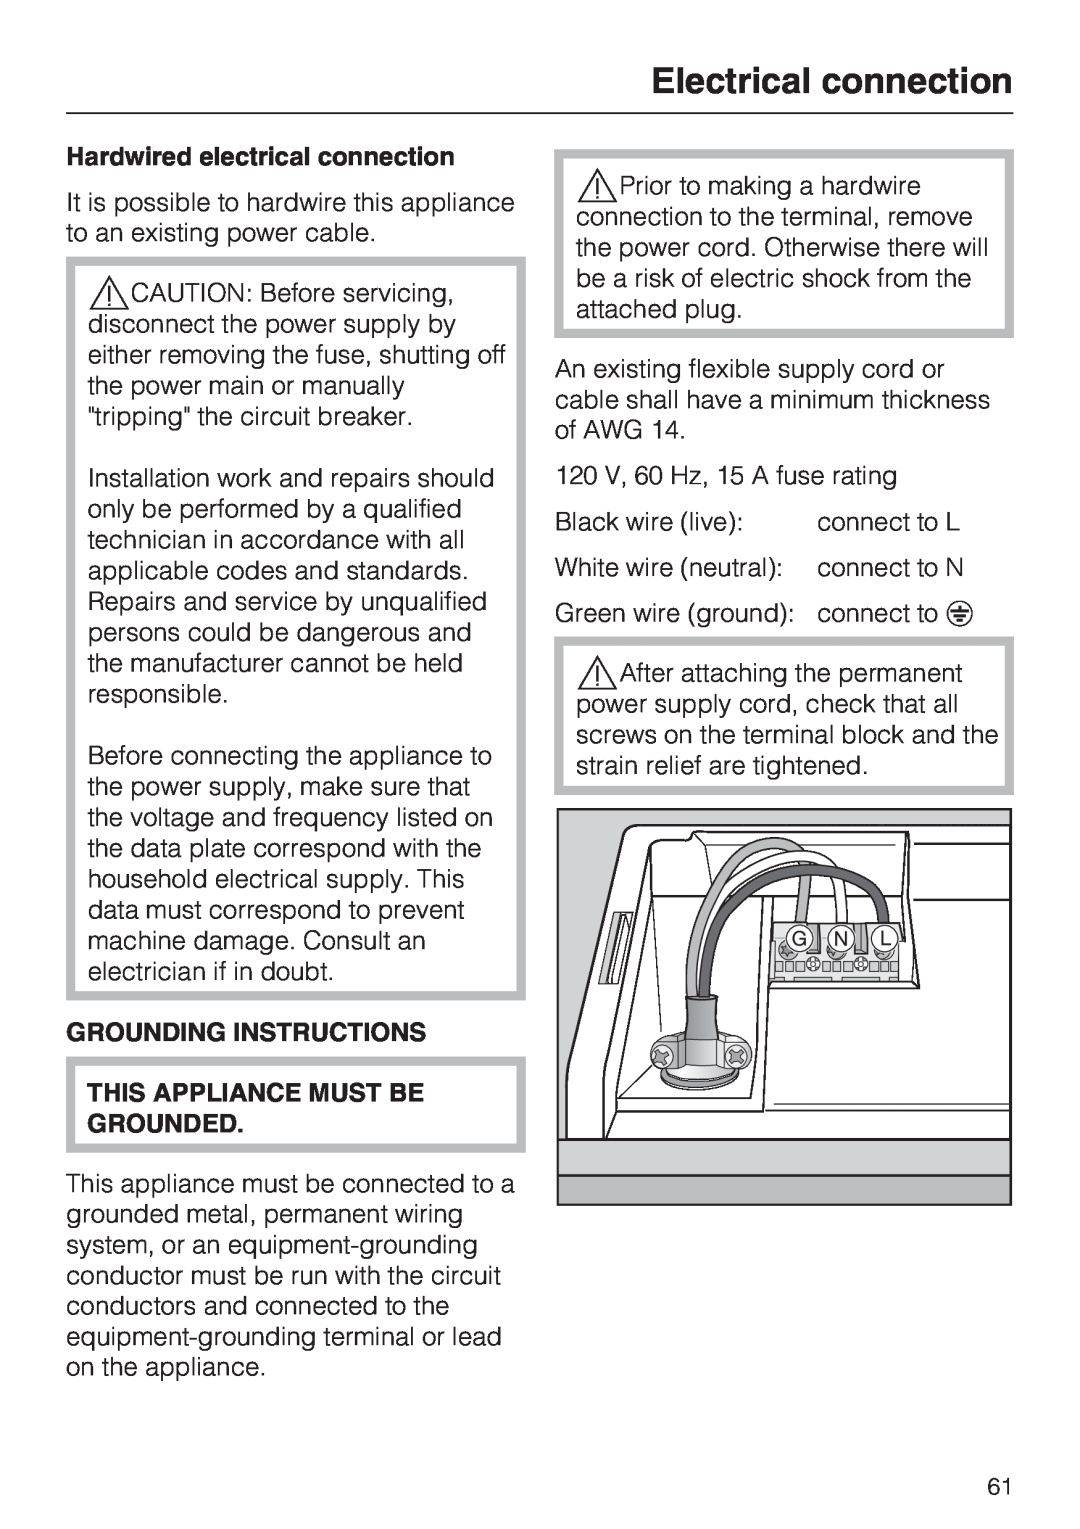 Miele G 5220, G 5225 operating instructions Electrical connection, Hardwired electrical connection, Grounding Instructions 